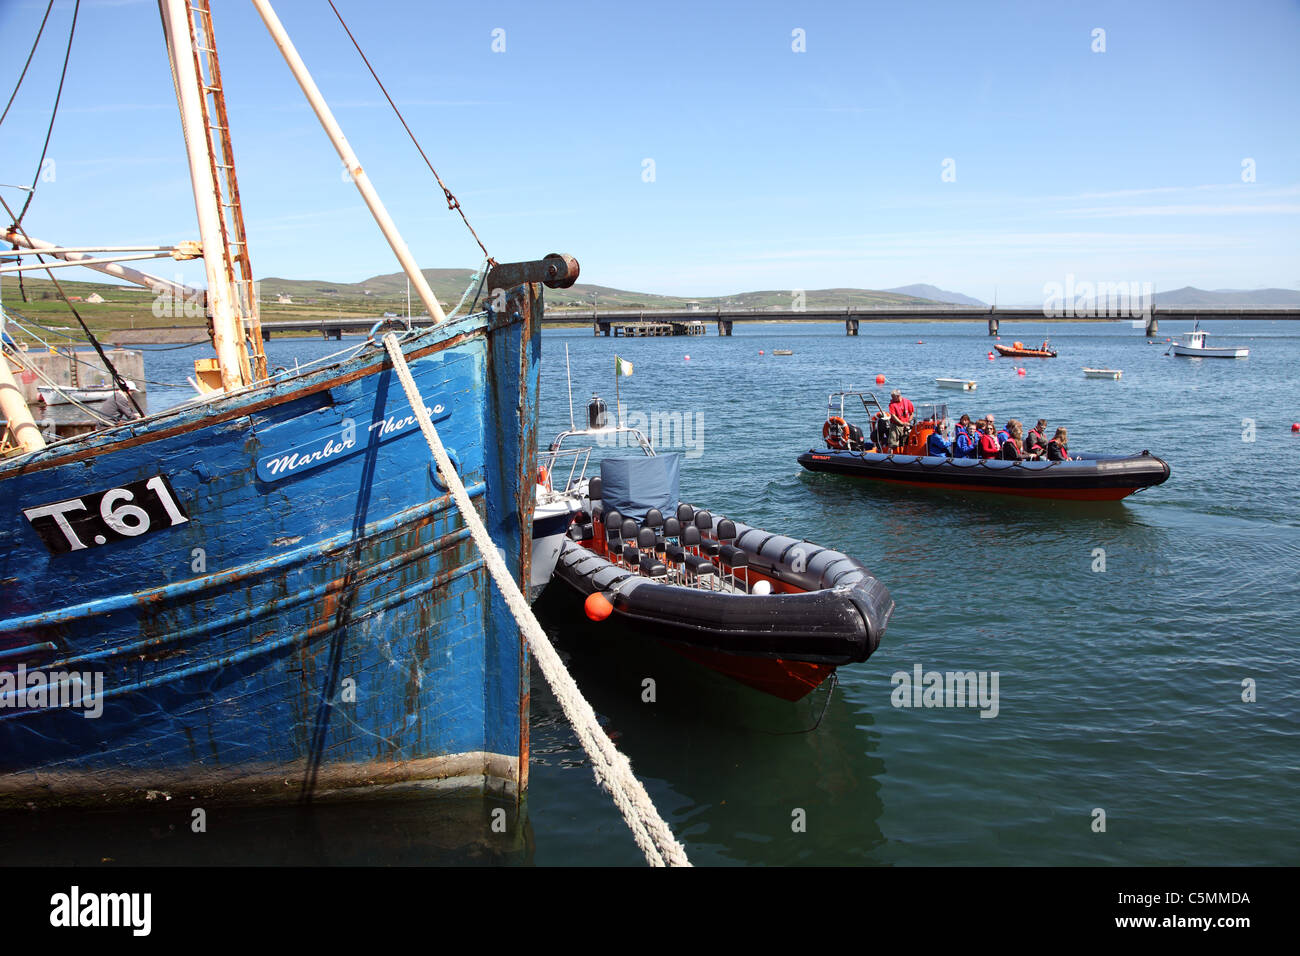 holidaymakers on sightseeing boat trip Portmagee Harbour Co Kerry Ireland Stock Photo